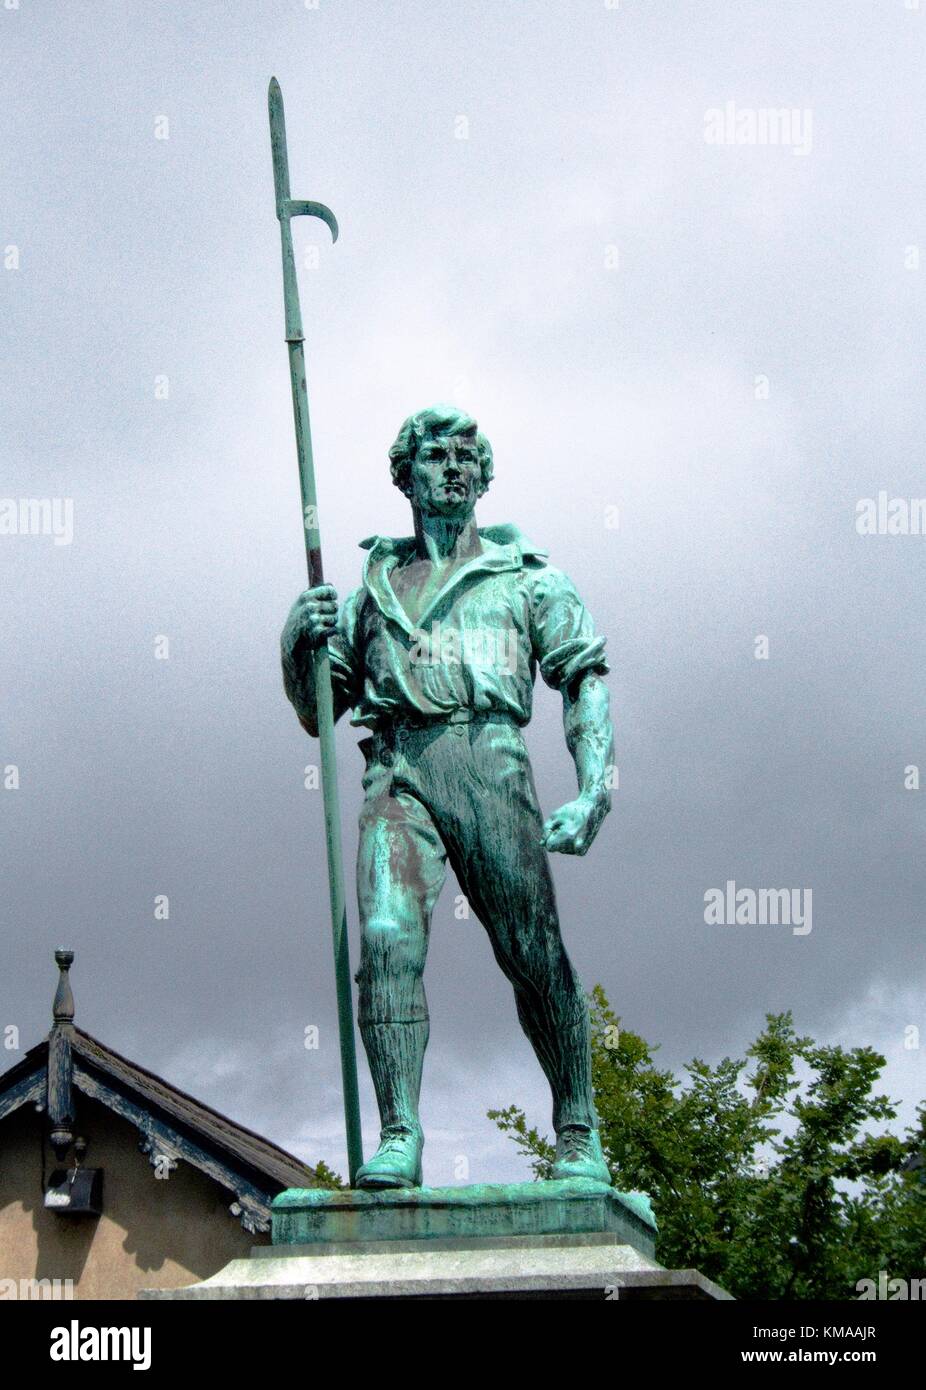 The 1798 Memorial in Wexford City of Irish rebel holding a pike marks the Rising of the United Irishmen against the English. Stock Photo